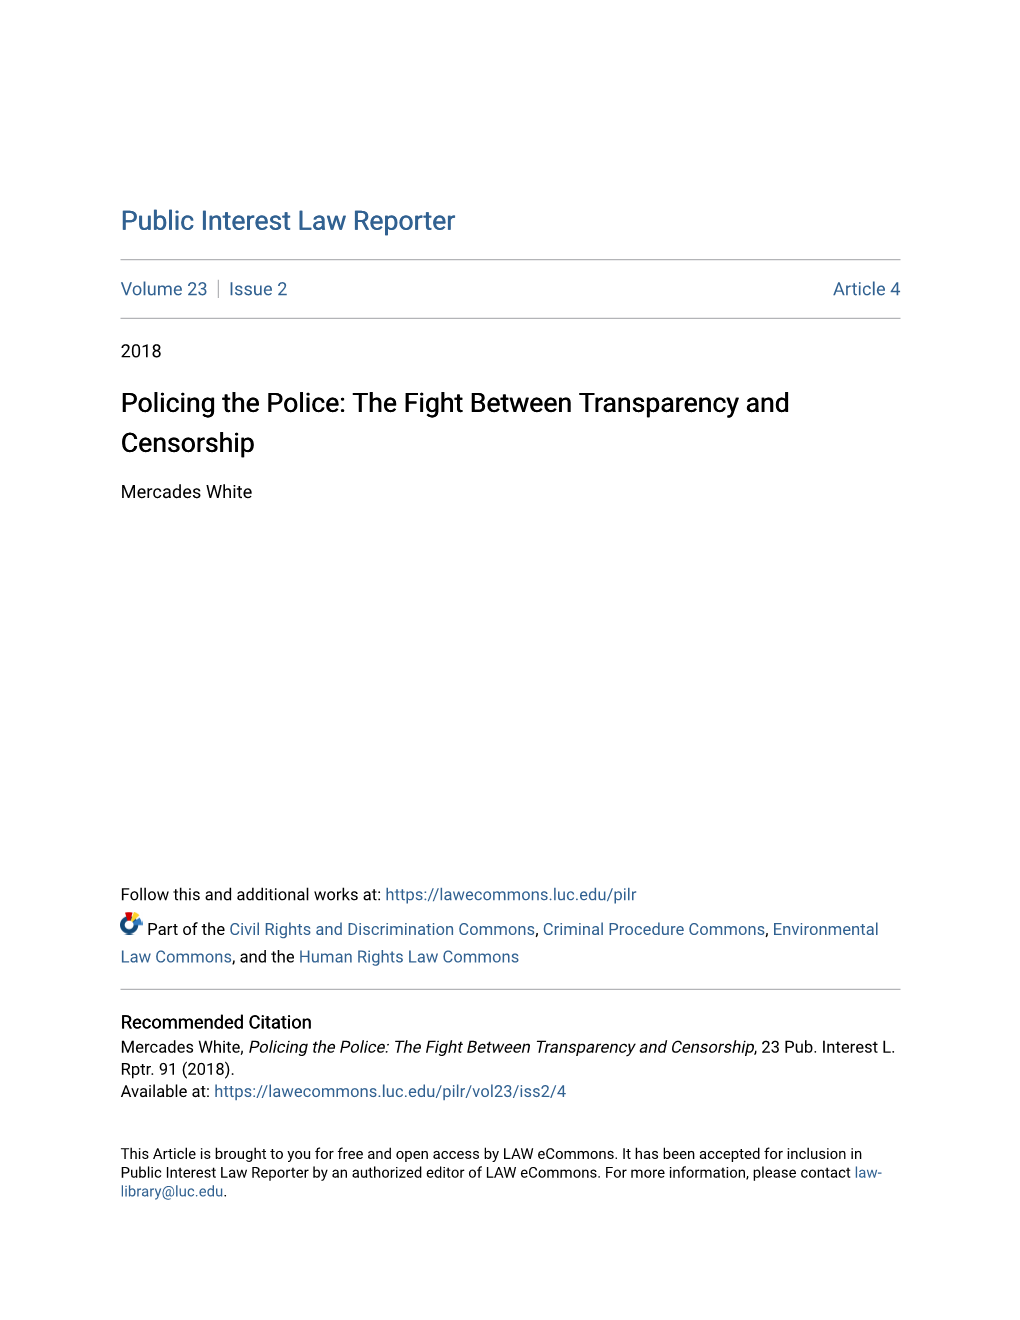 Policing the Police: the Fight Between Transparency and Censorship